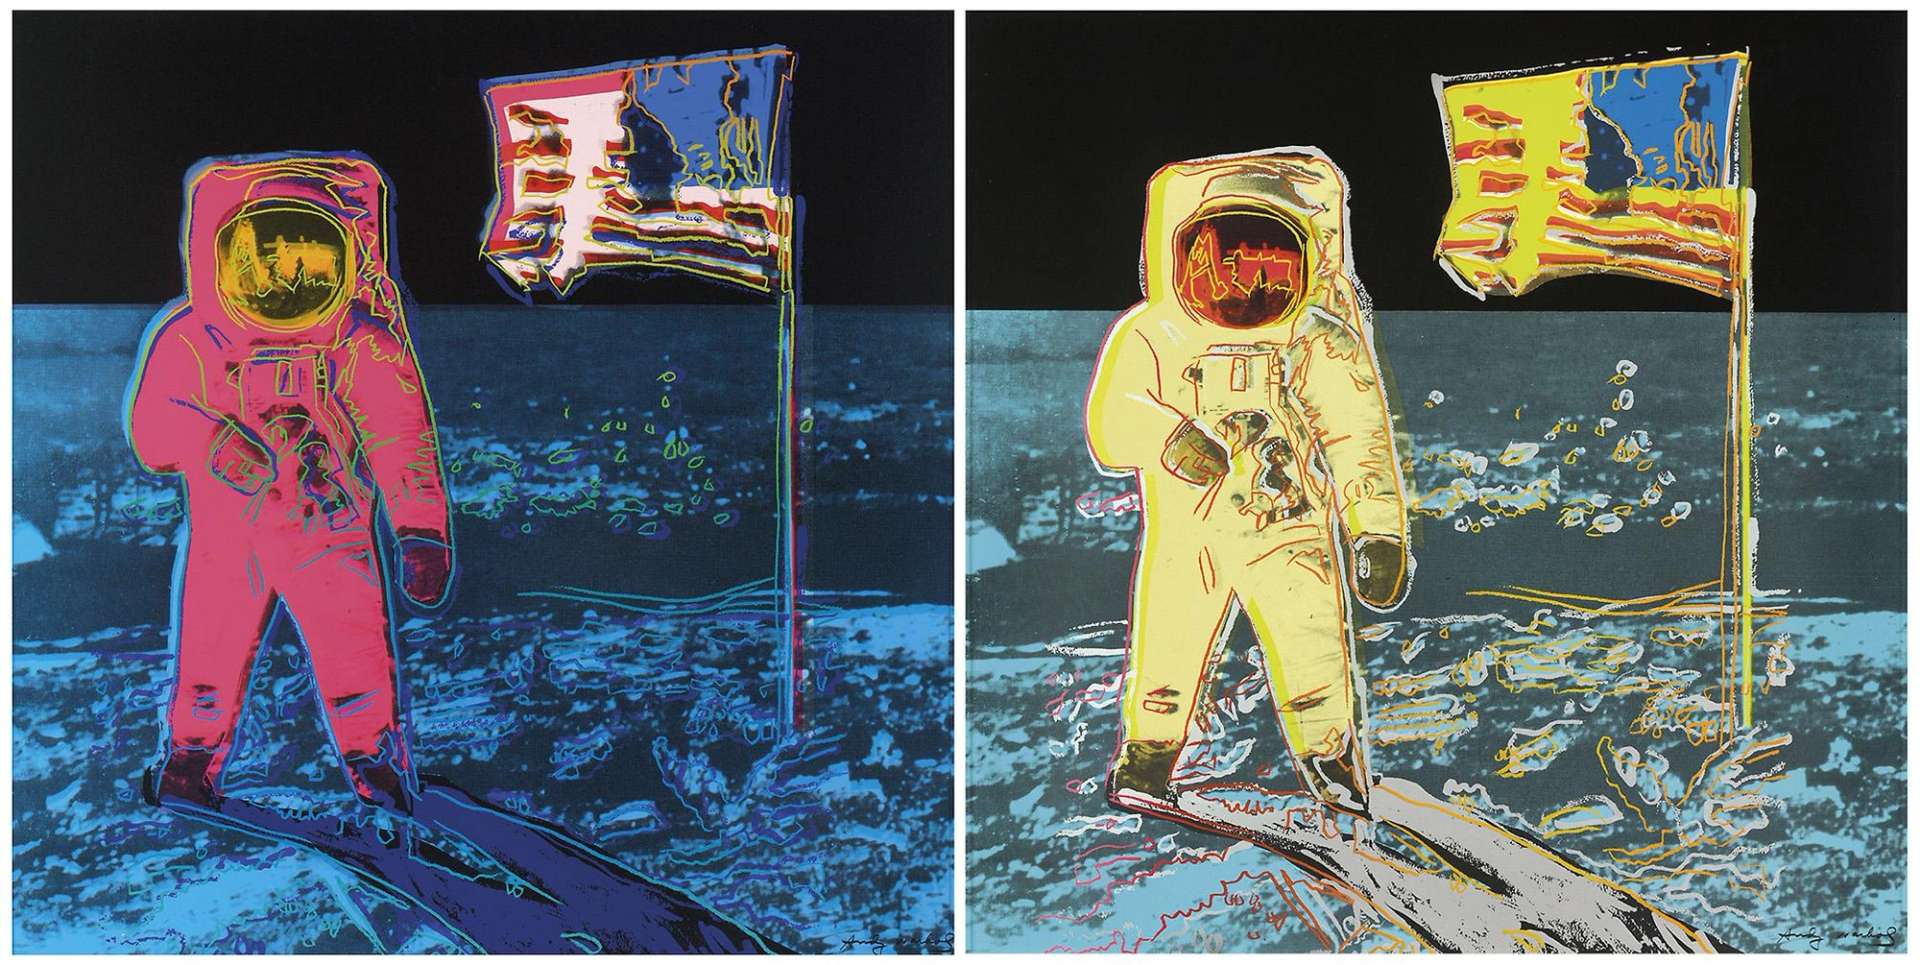 A set of two screenprints by Andy Warhol depicting Neil Armstrong’s famous 1969 photograph of Buzz Aldrin’s steps on the moon, with Aldrin depicting in pink on the left and yellow on the right.